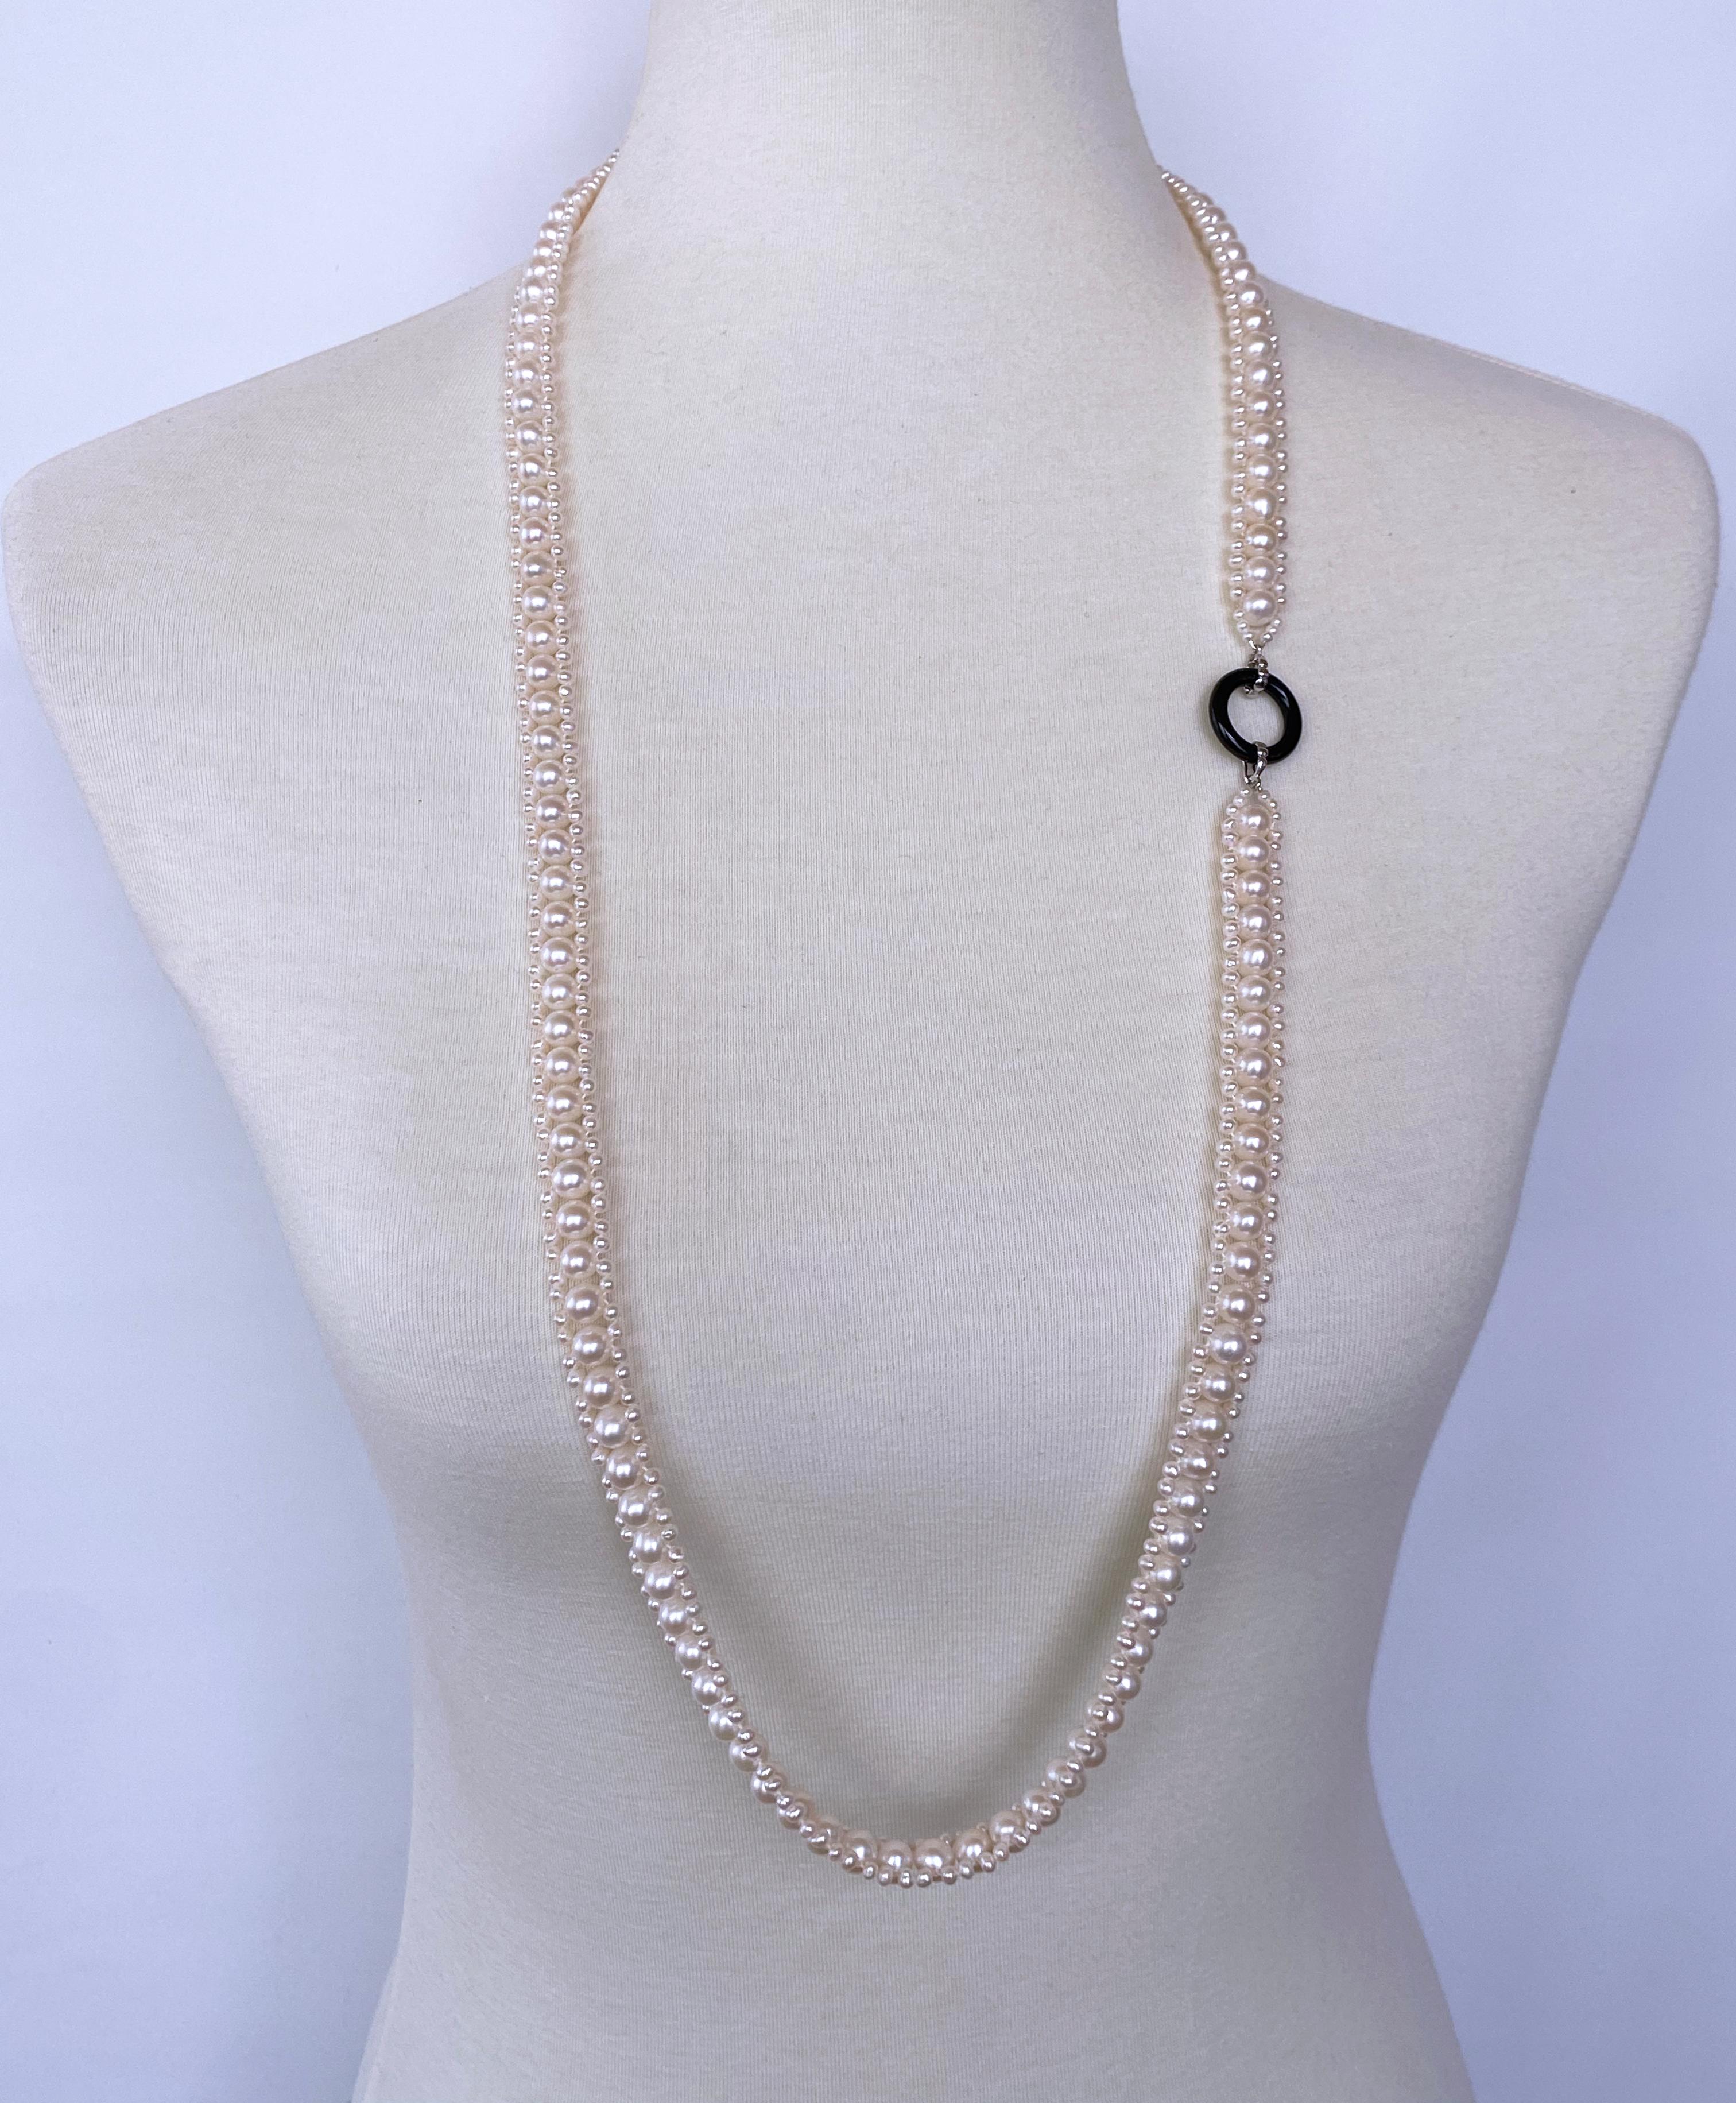 Marina J. Woven Pearl Sautoir with Black Onyx and Silver In New Condition For Sale In Los Angeles, CA